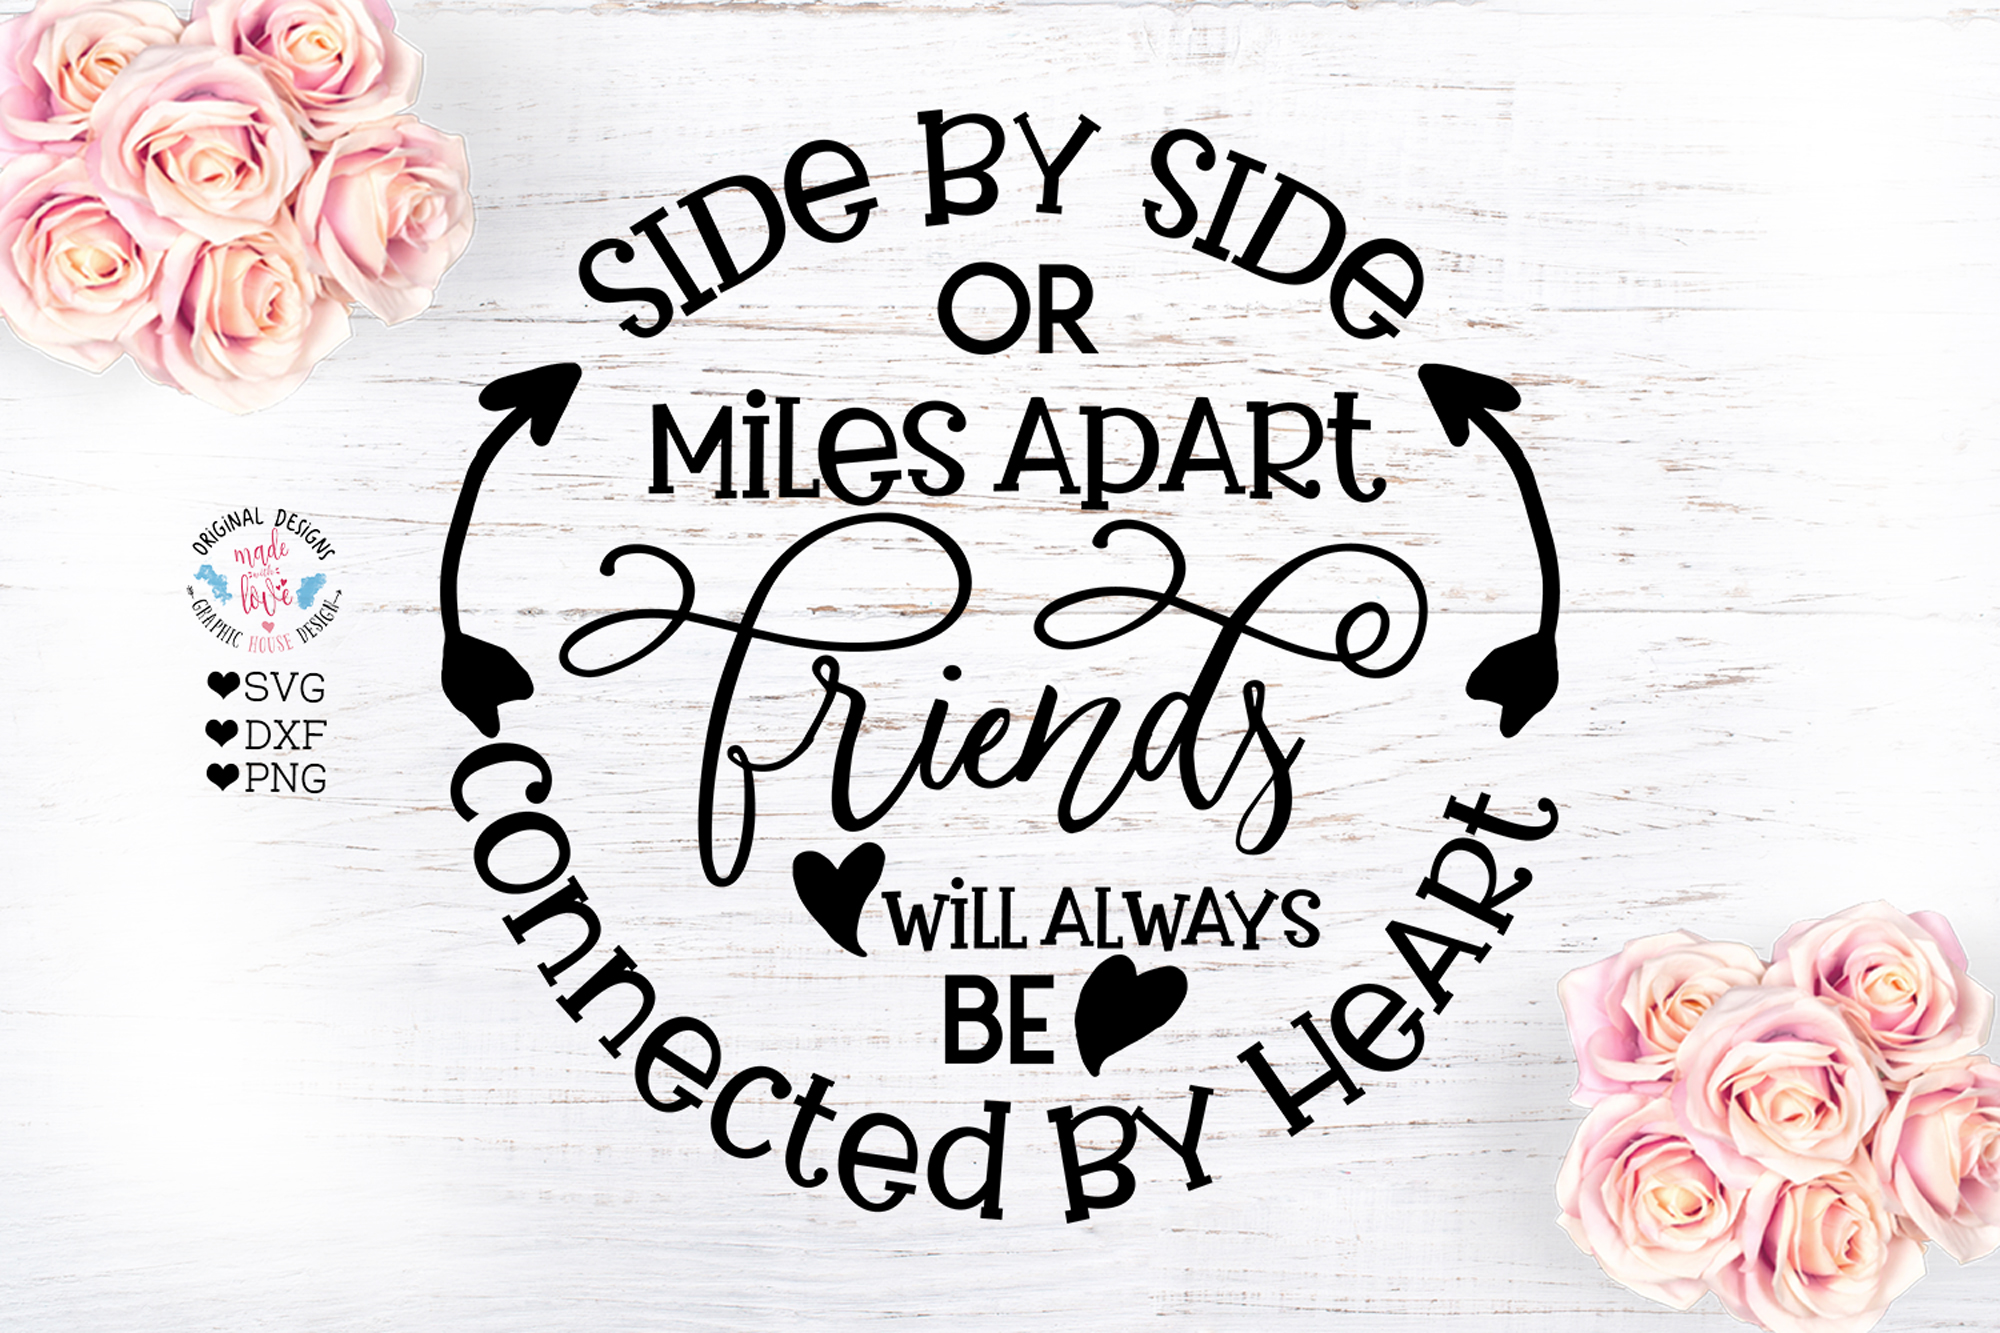 Friends will be Connected By Heart - Friendship Quote ...